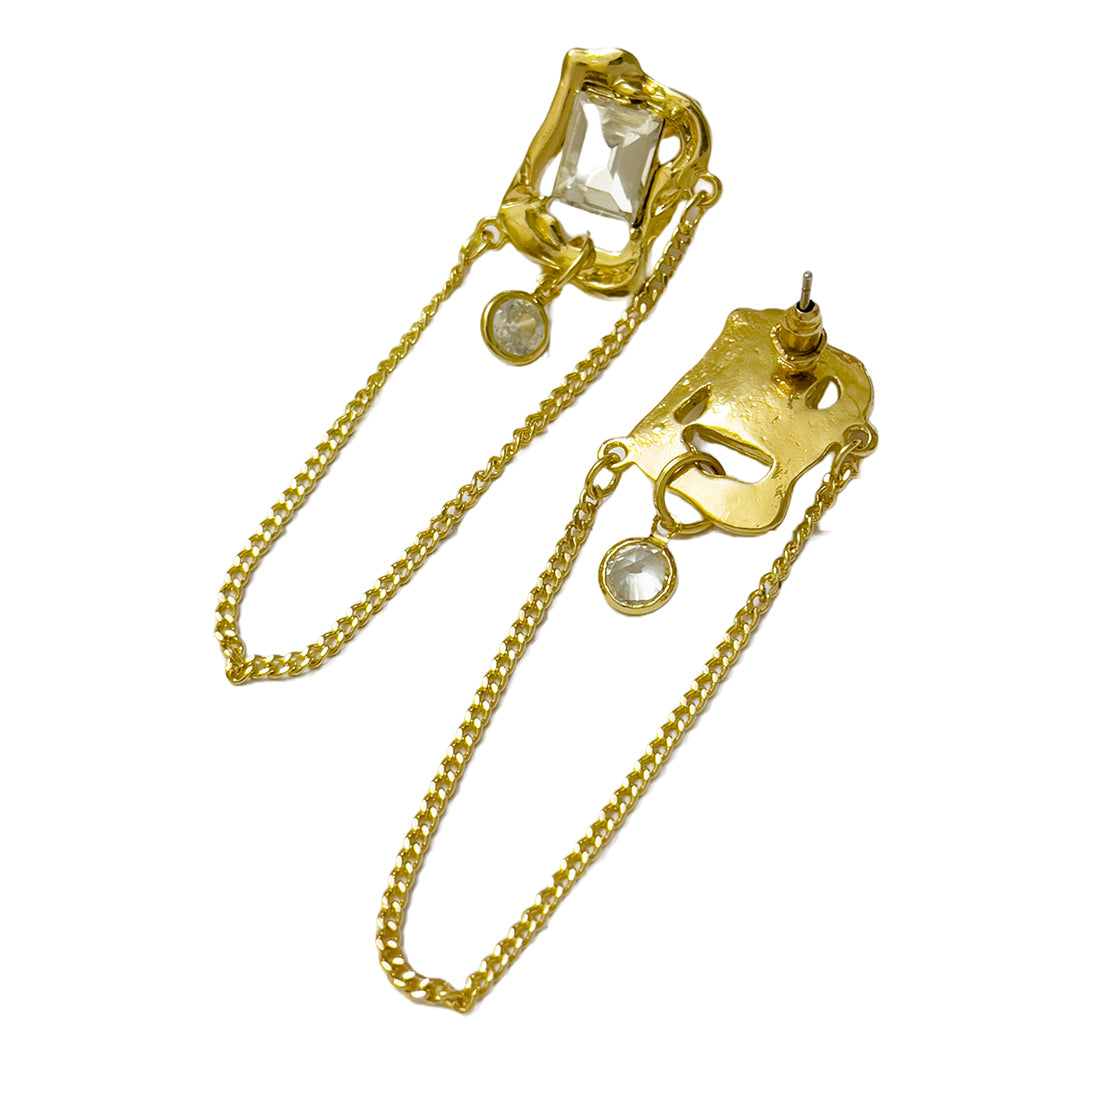 Oversized Hammered Square Gold-Toned Diamante Stud & Tassel Drop Earrings